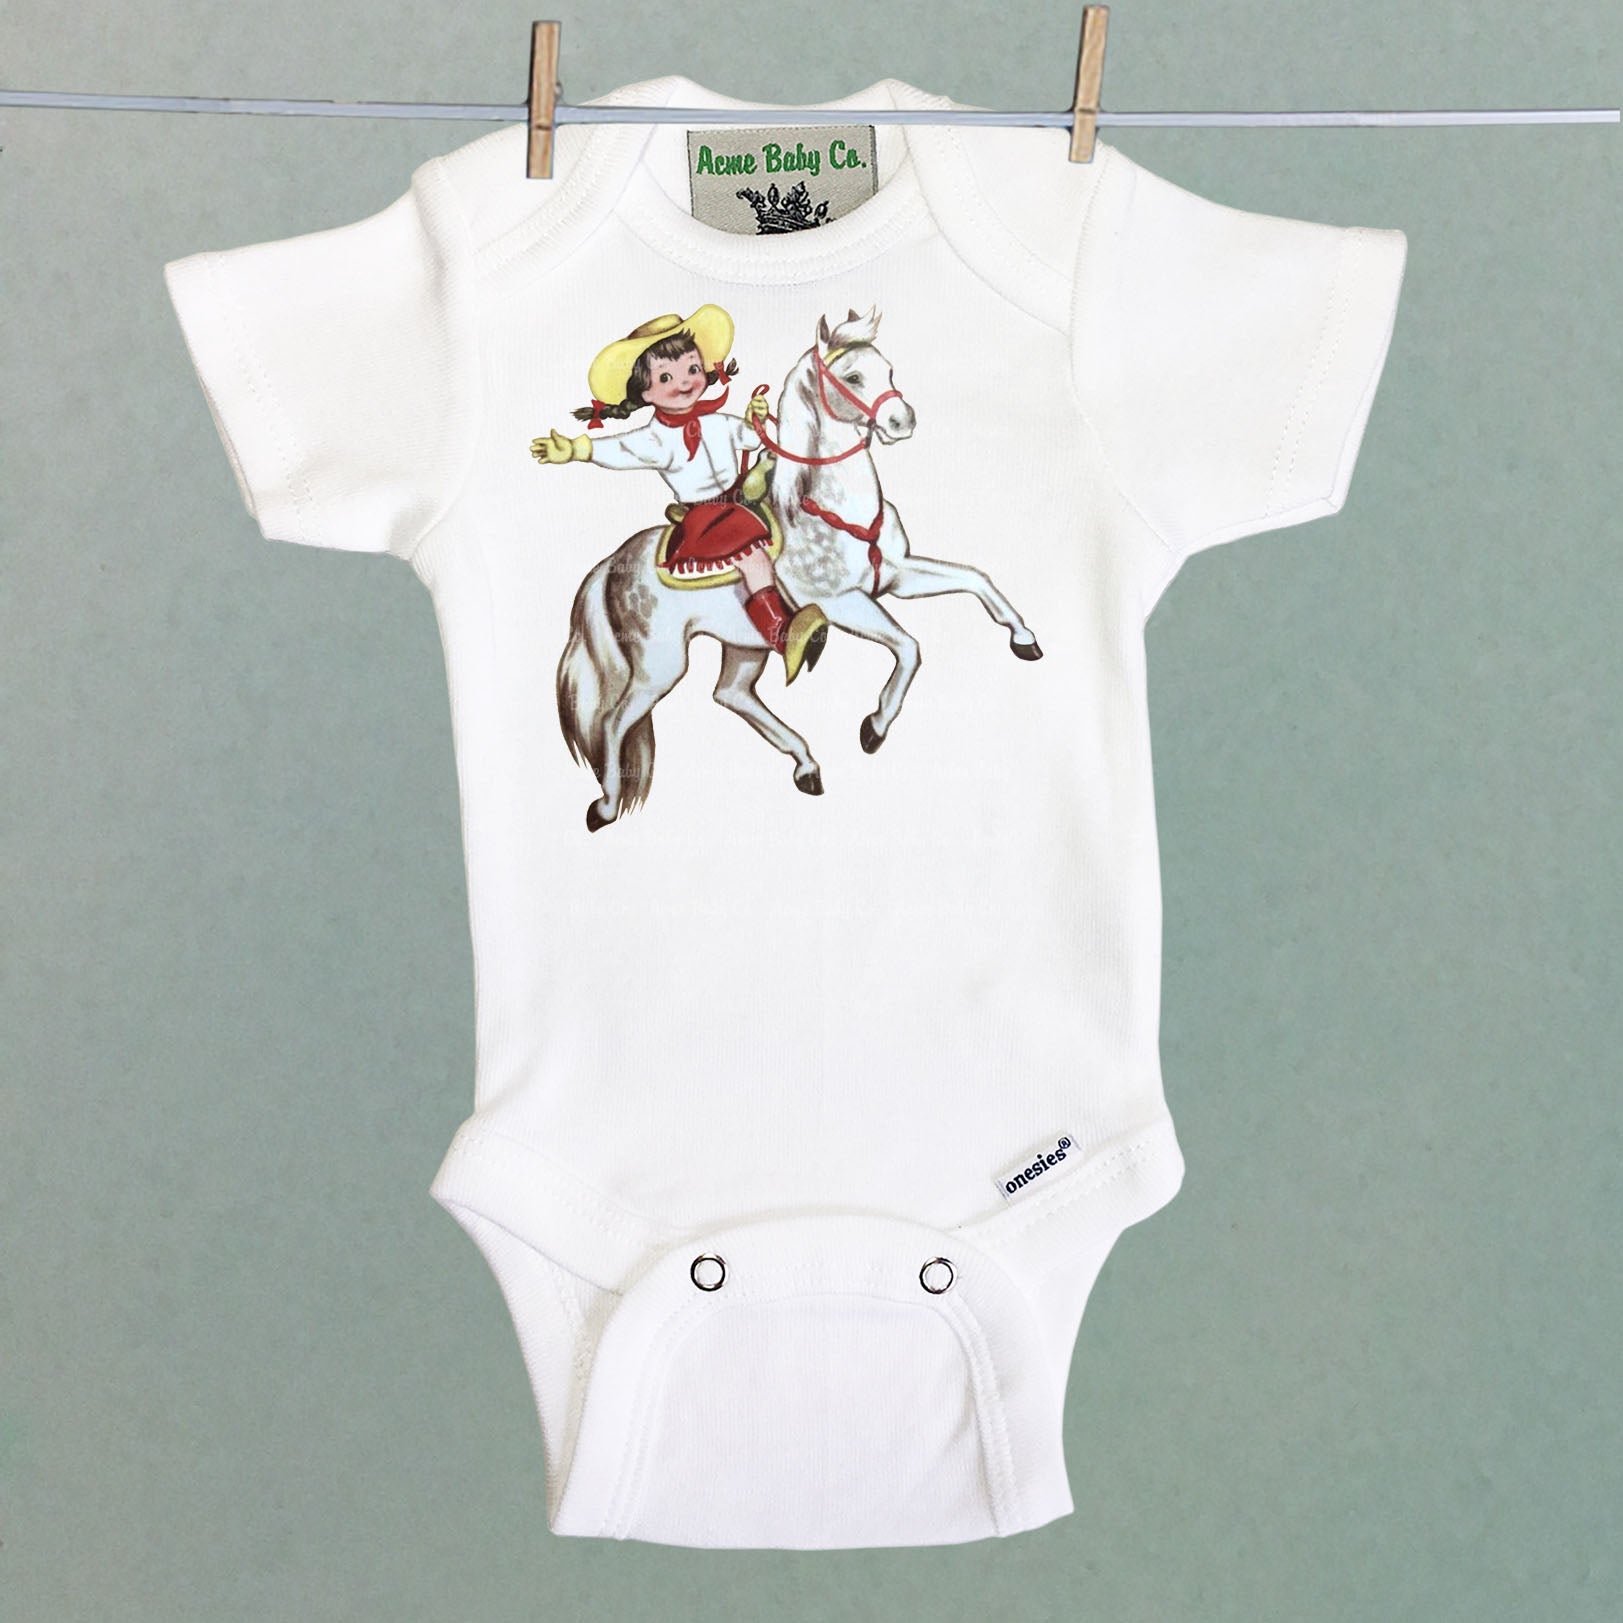 Cowgirl and White Horse One Piece Baby Bodysuit